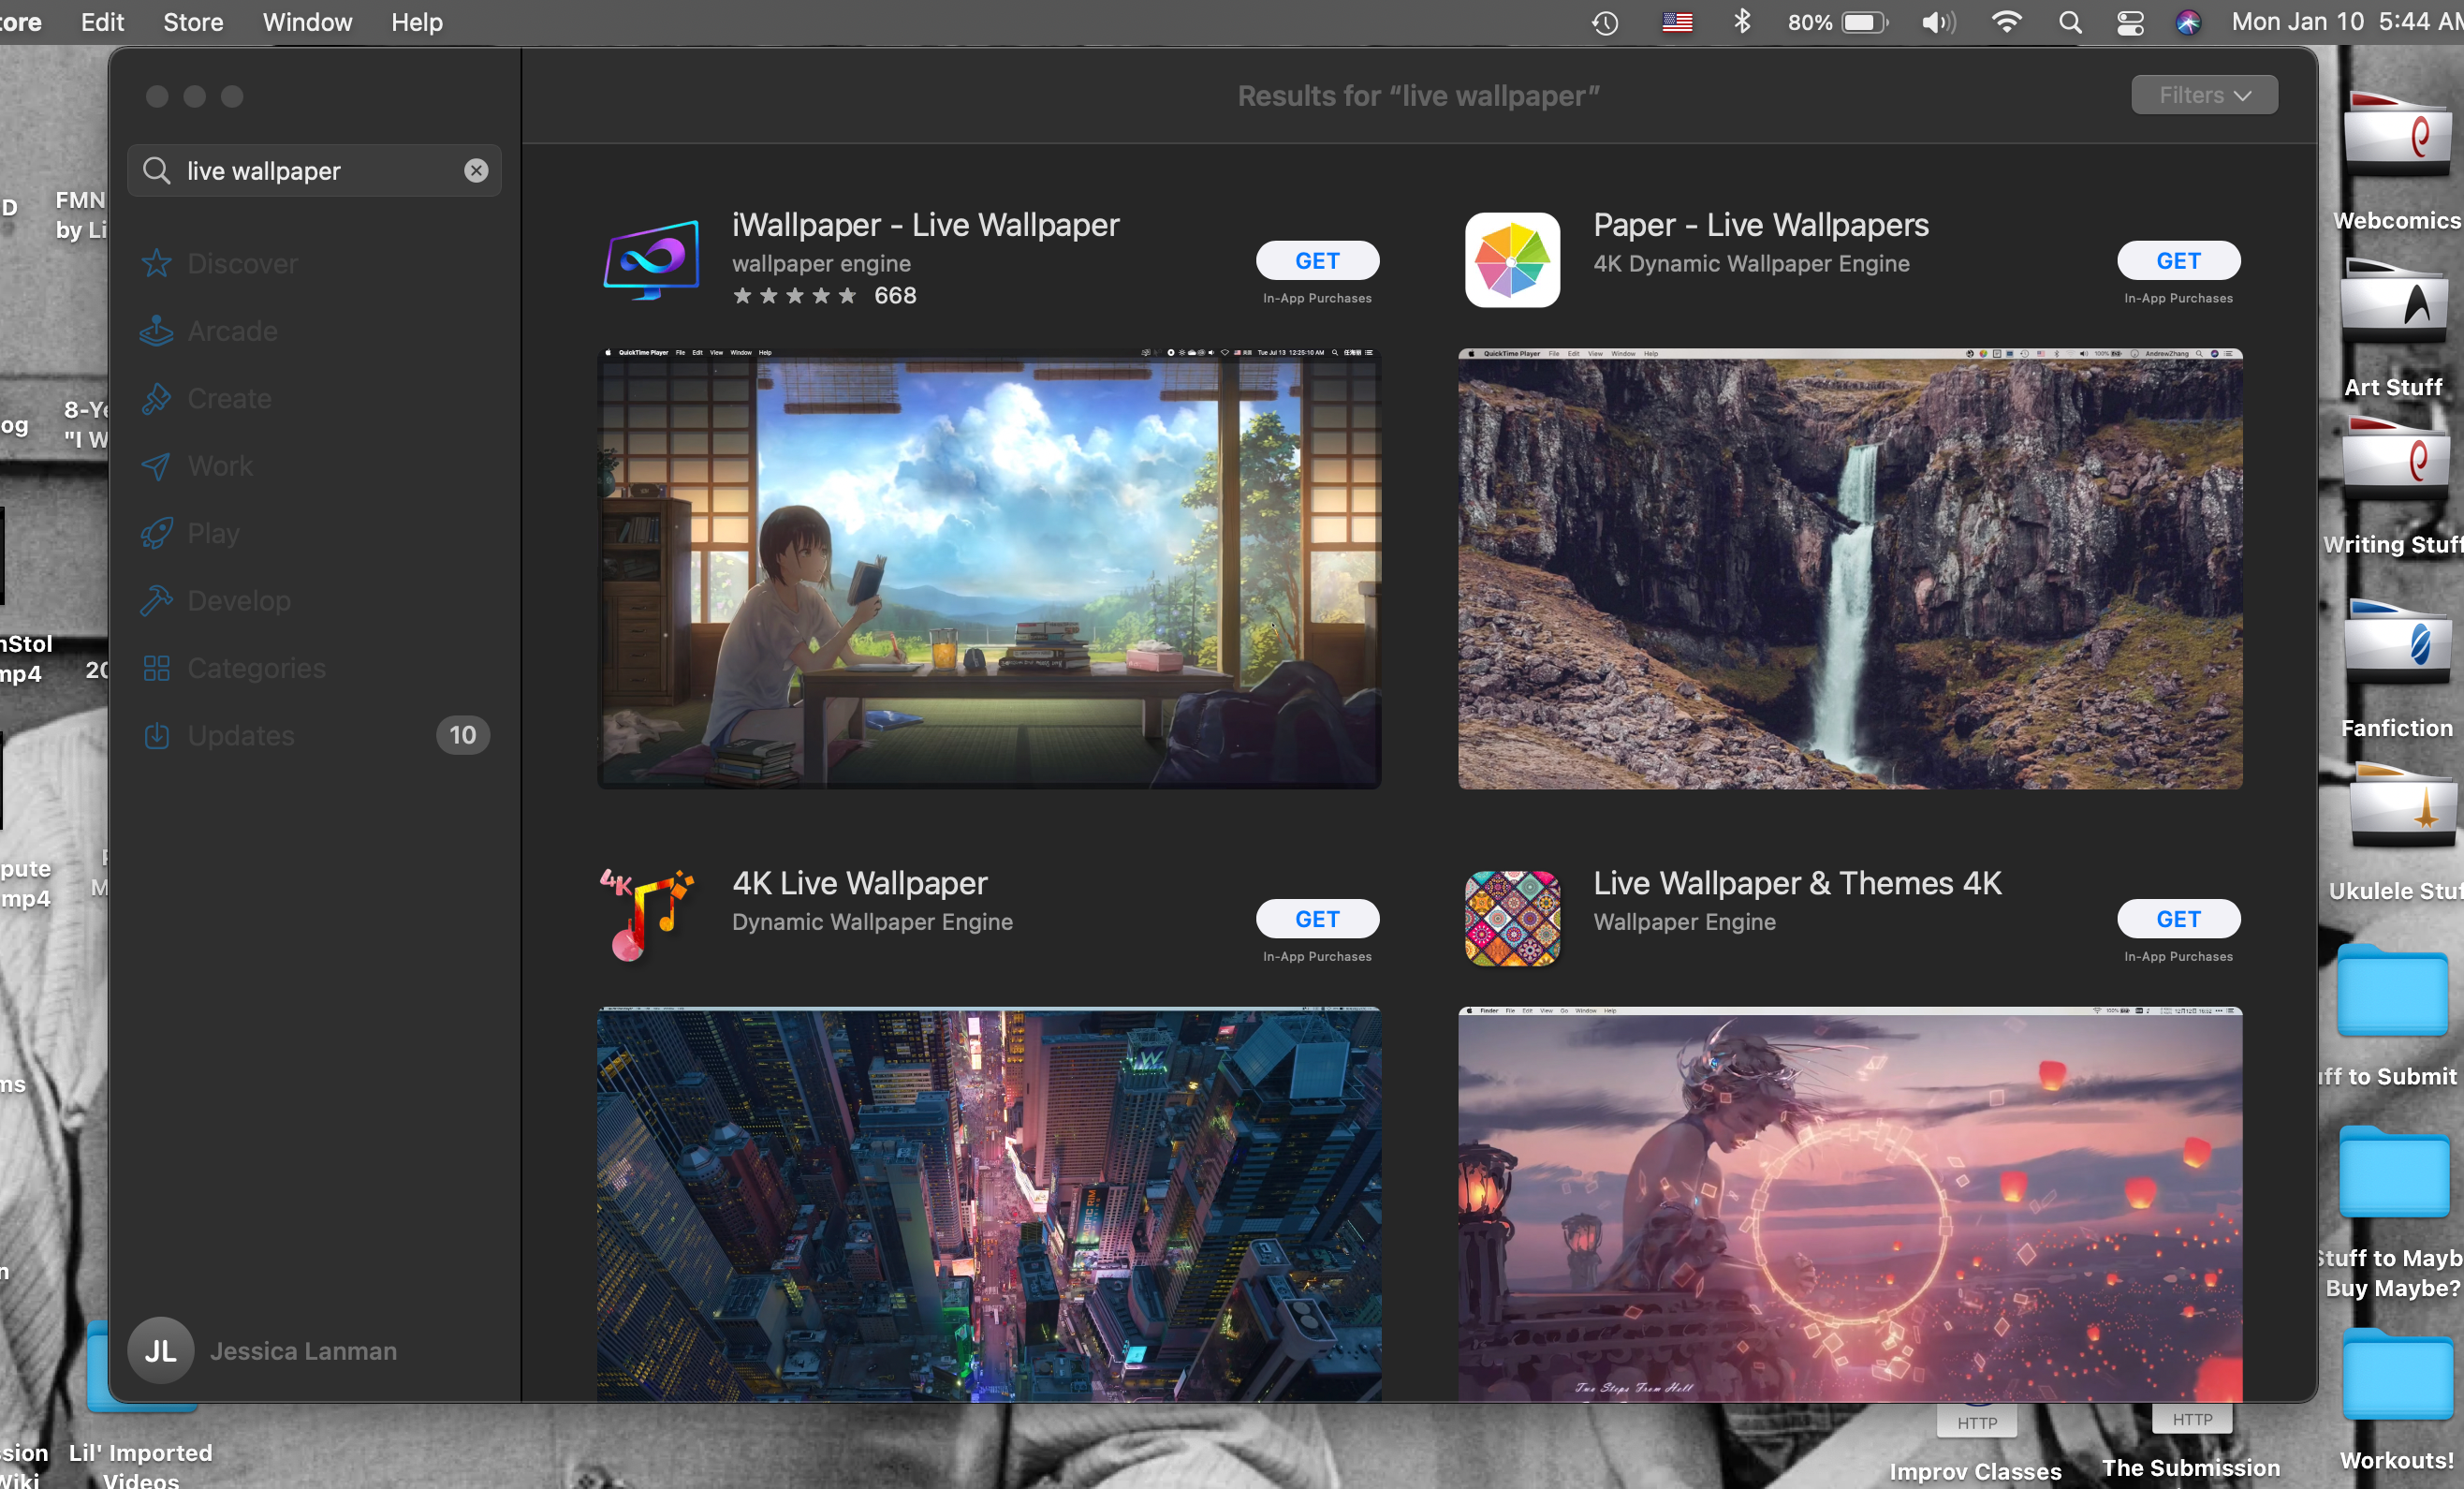 Some live wallpaper apps available in Mac App Store